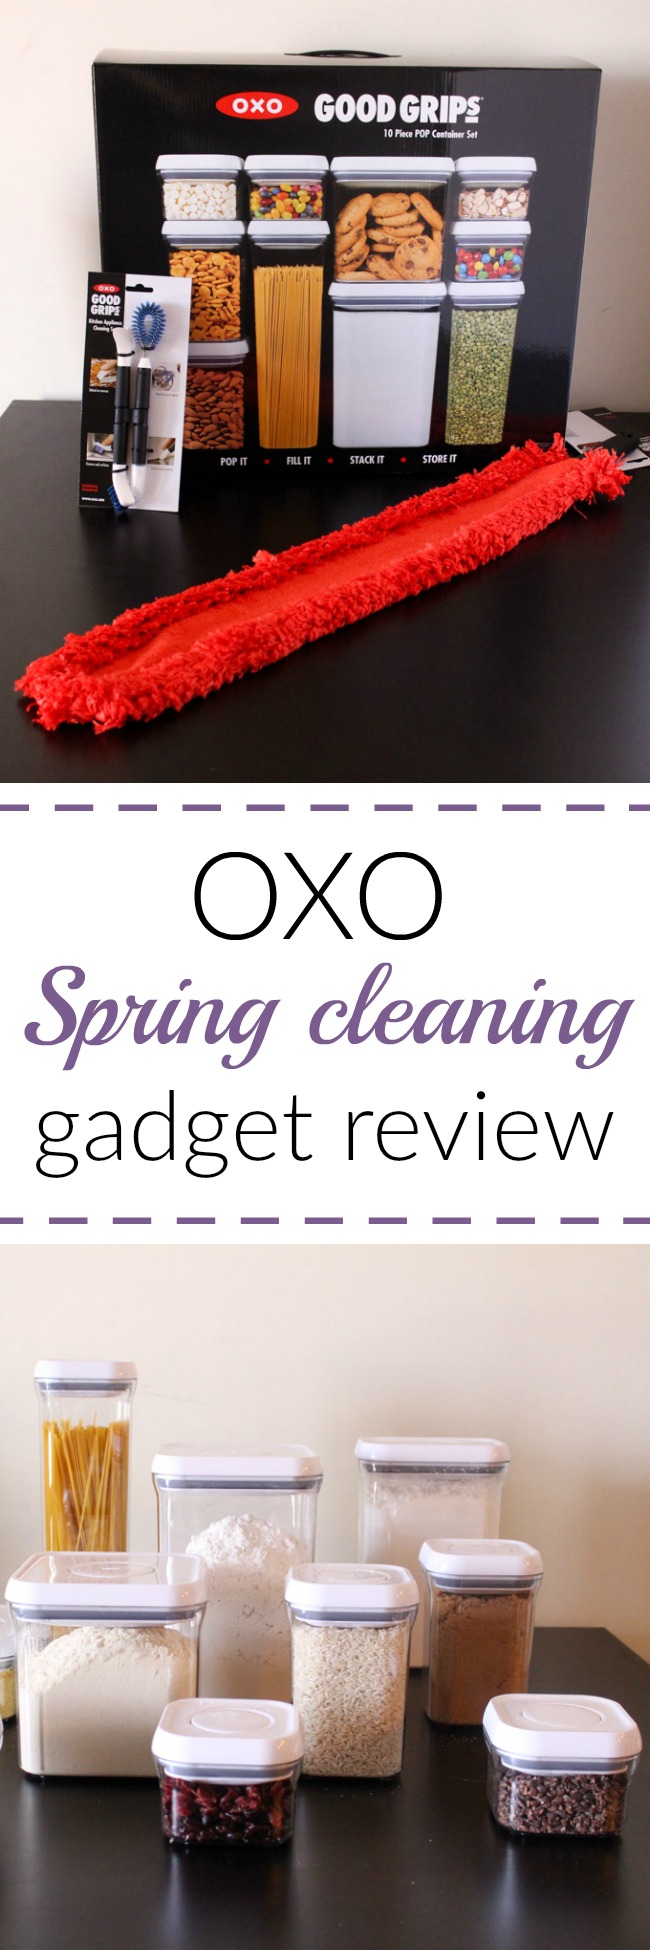 http://www.cookingismessy.com/wp-content/uploads/2017/04/oxo_spring_cleaning_banner.jpg